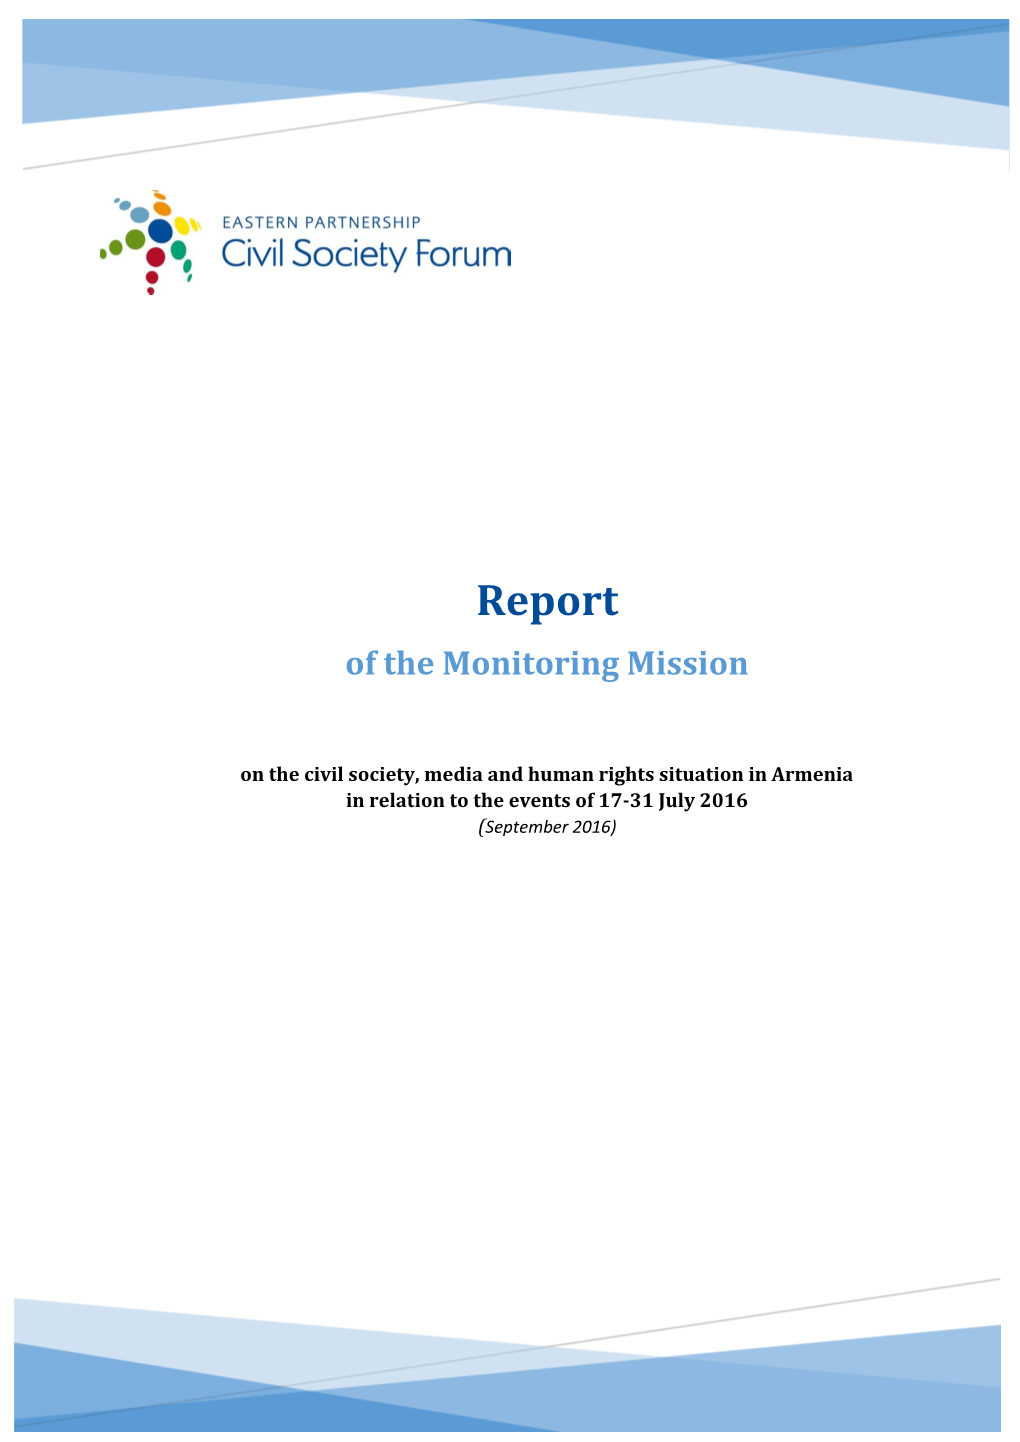 Report of the Monitoring Mission